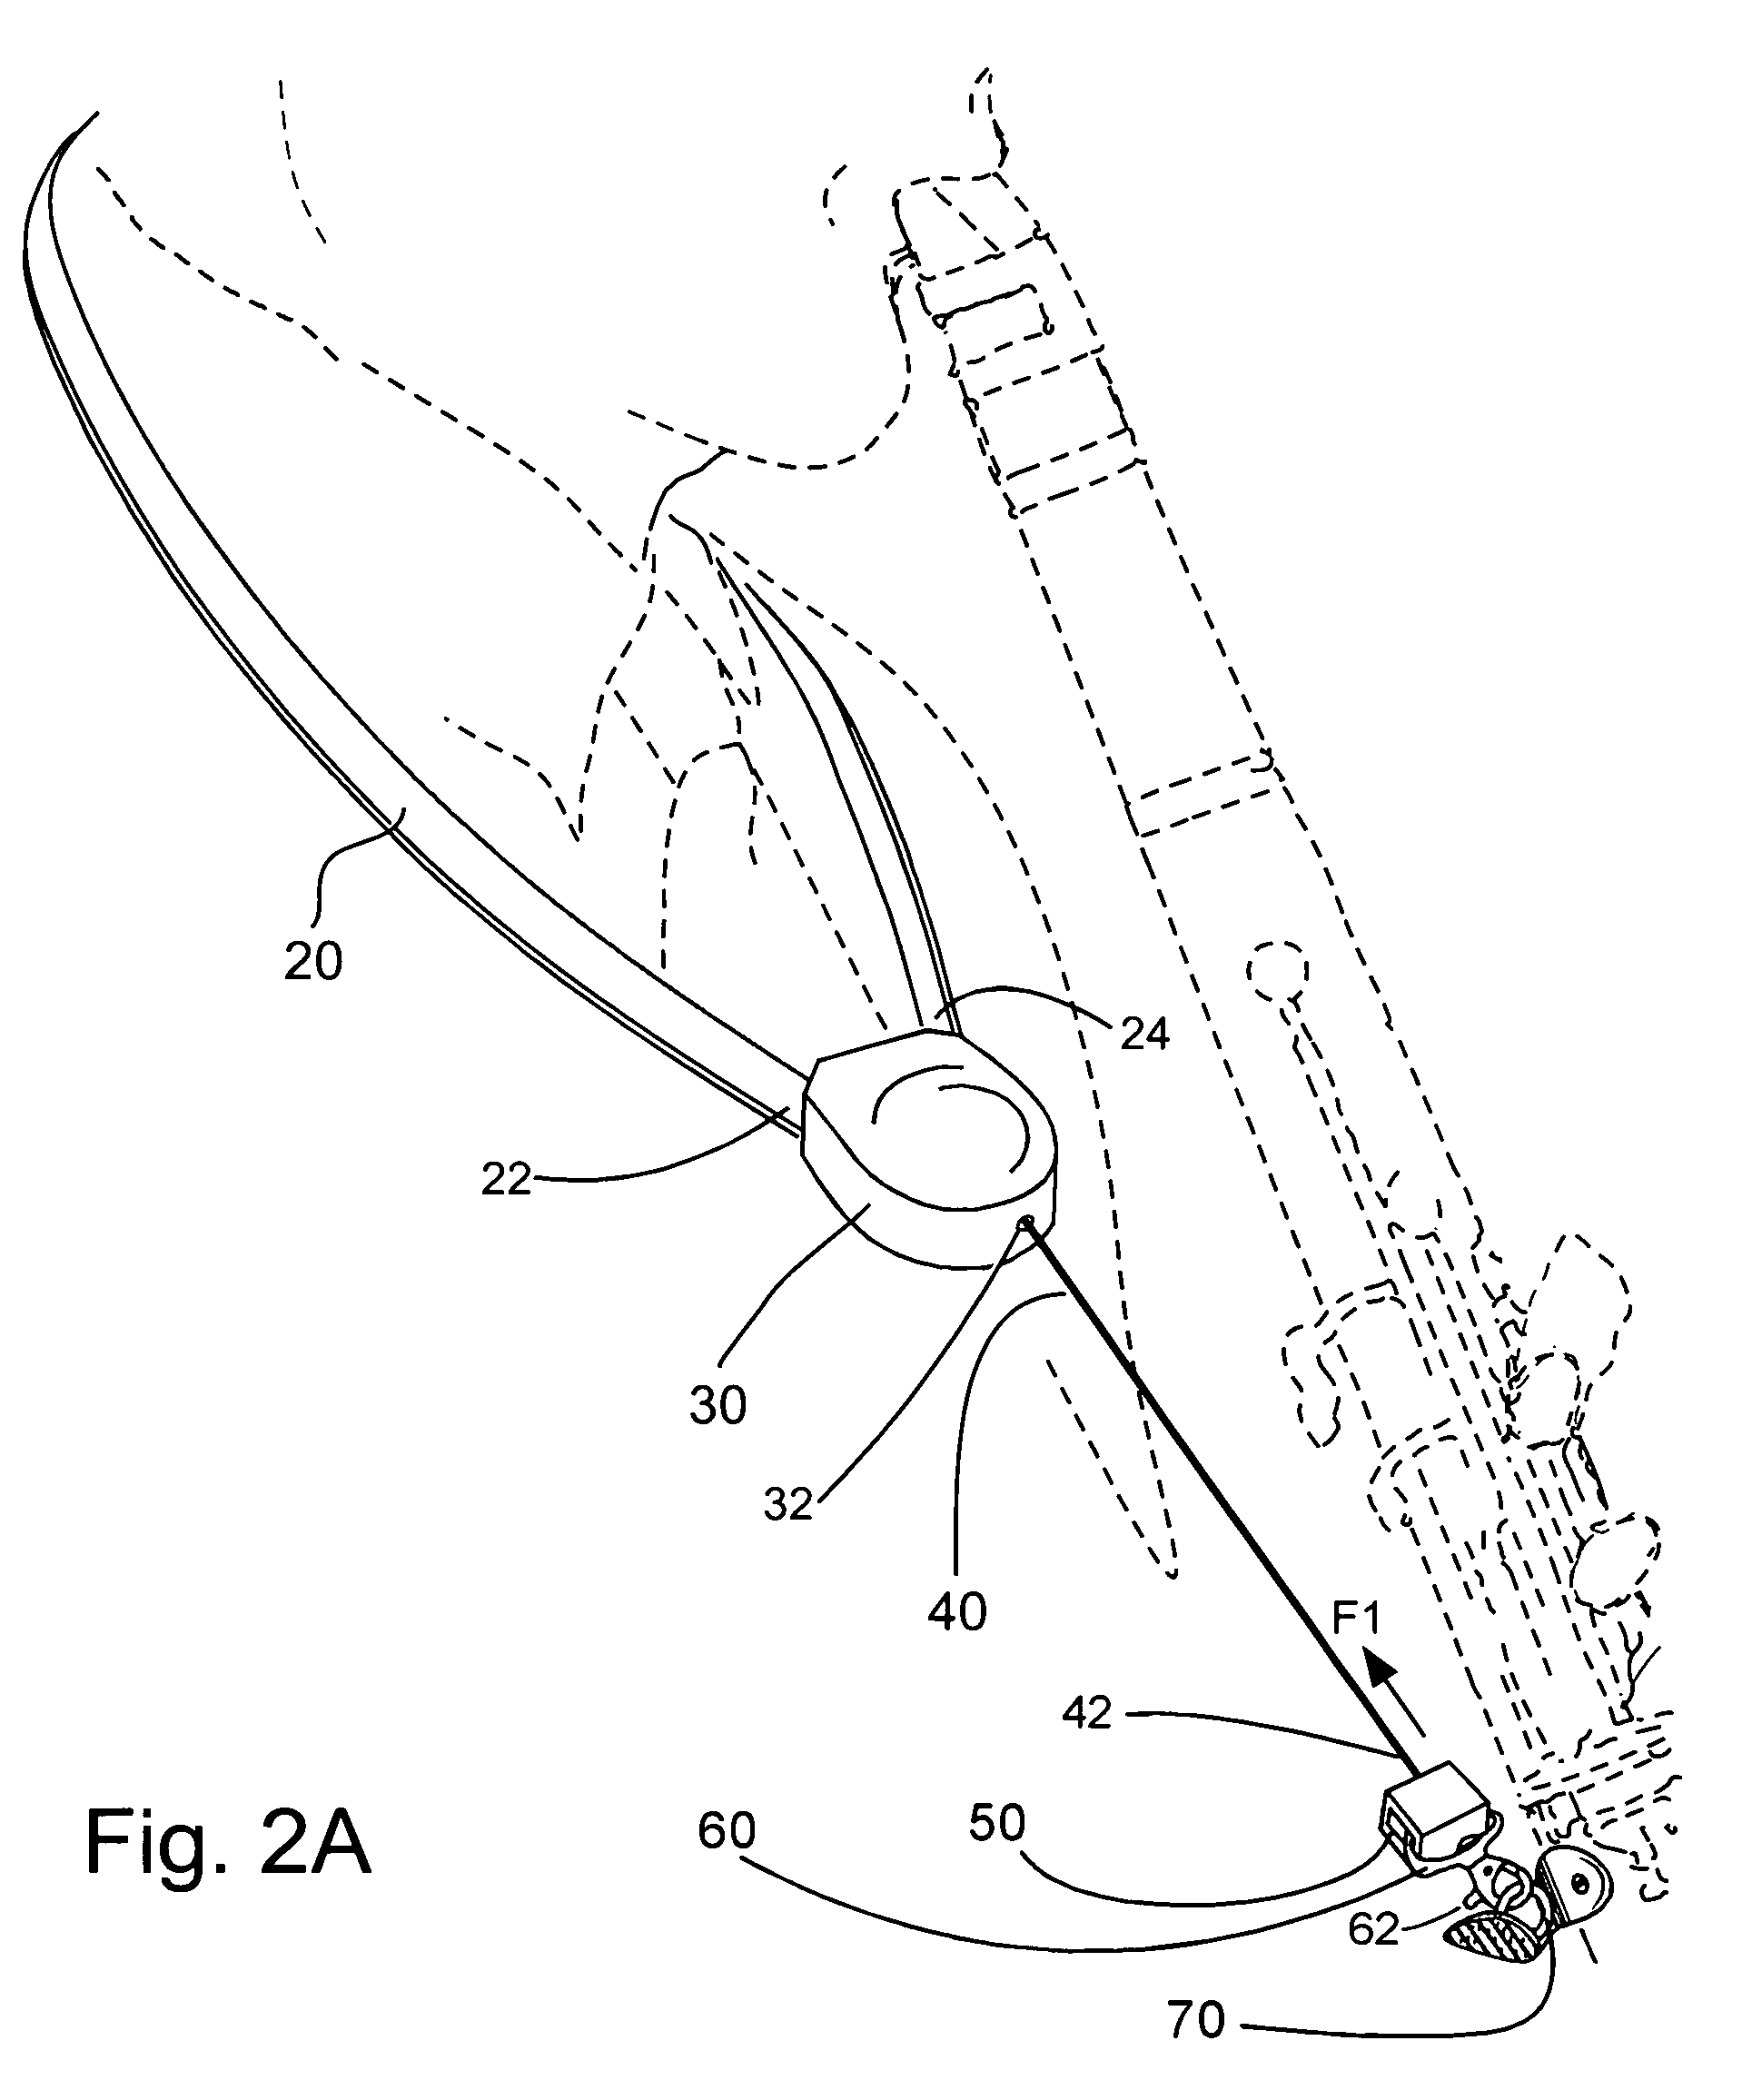 Weight-relieving device for a woodwind instrument